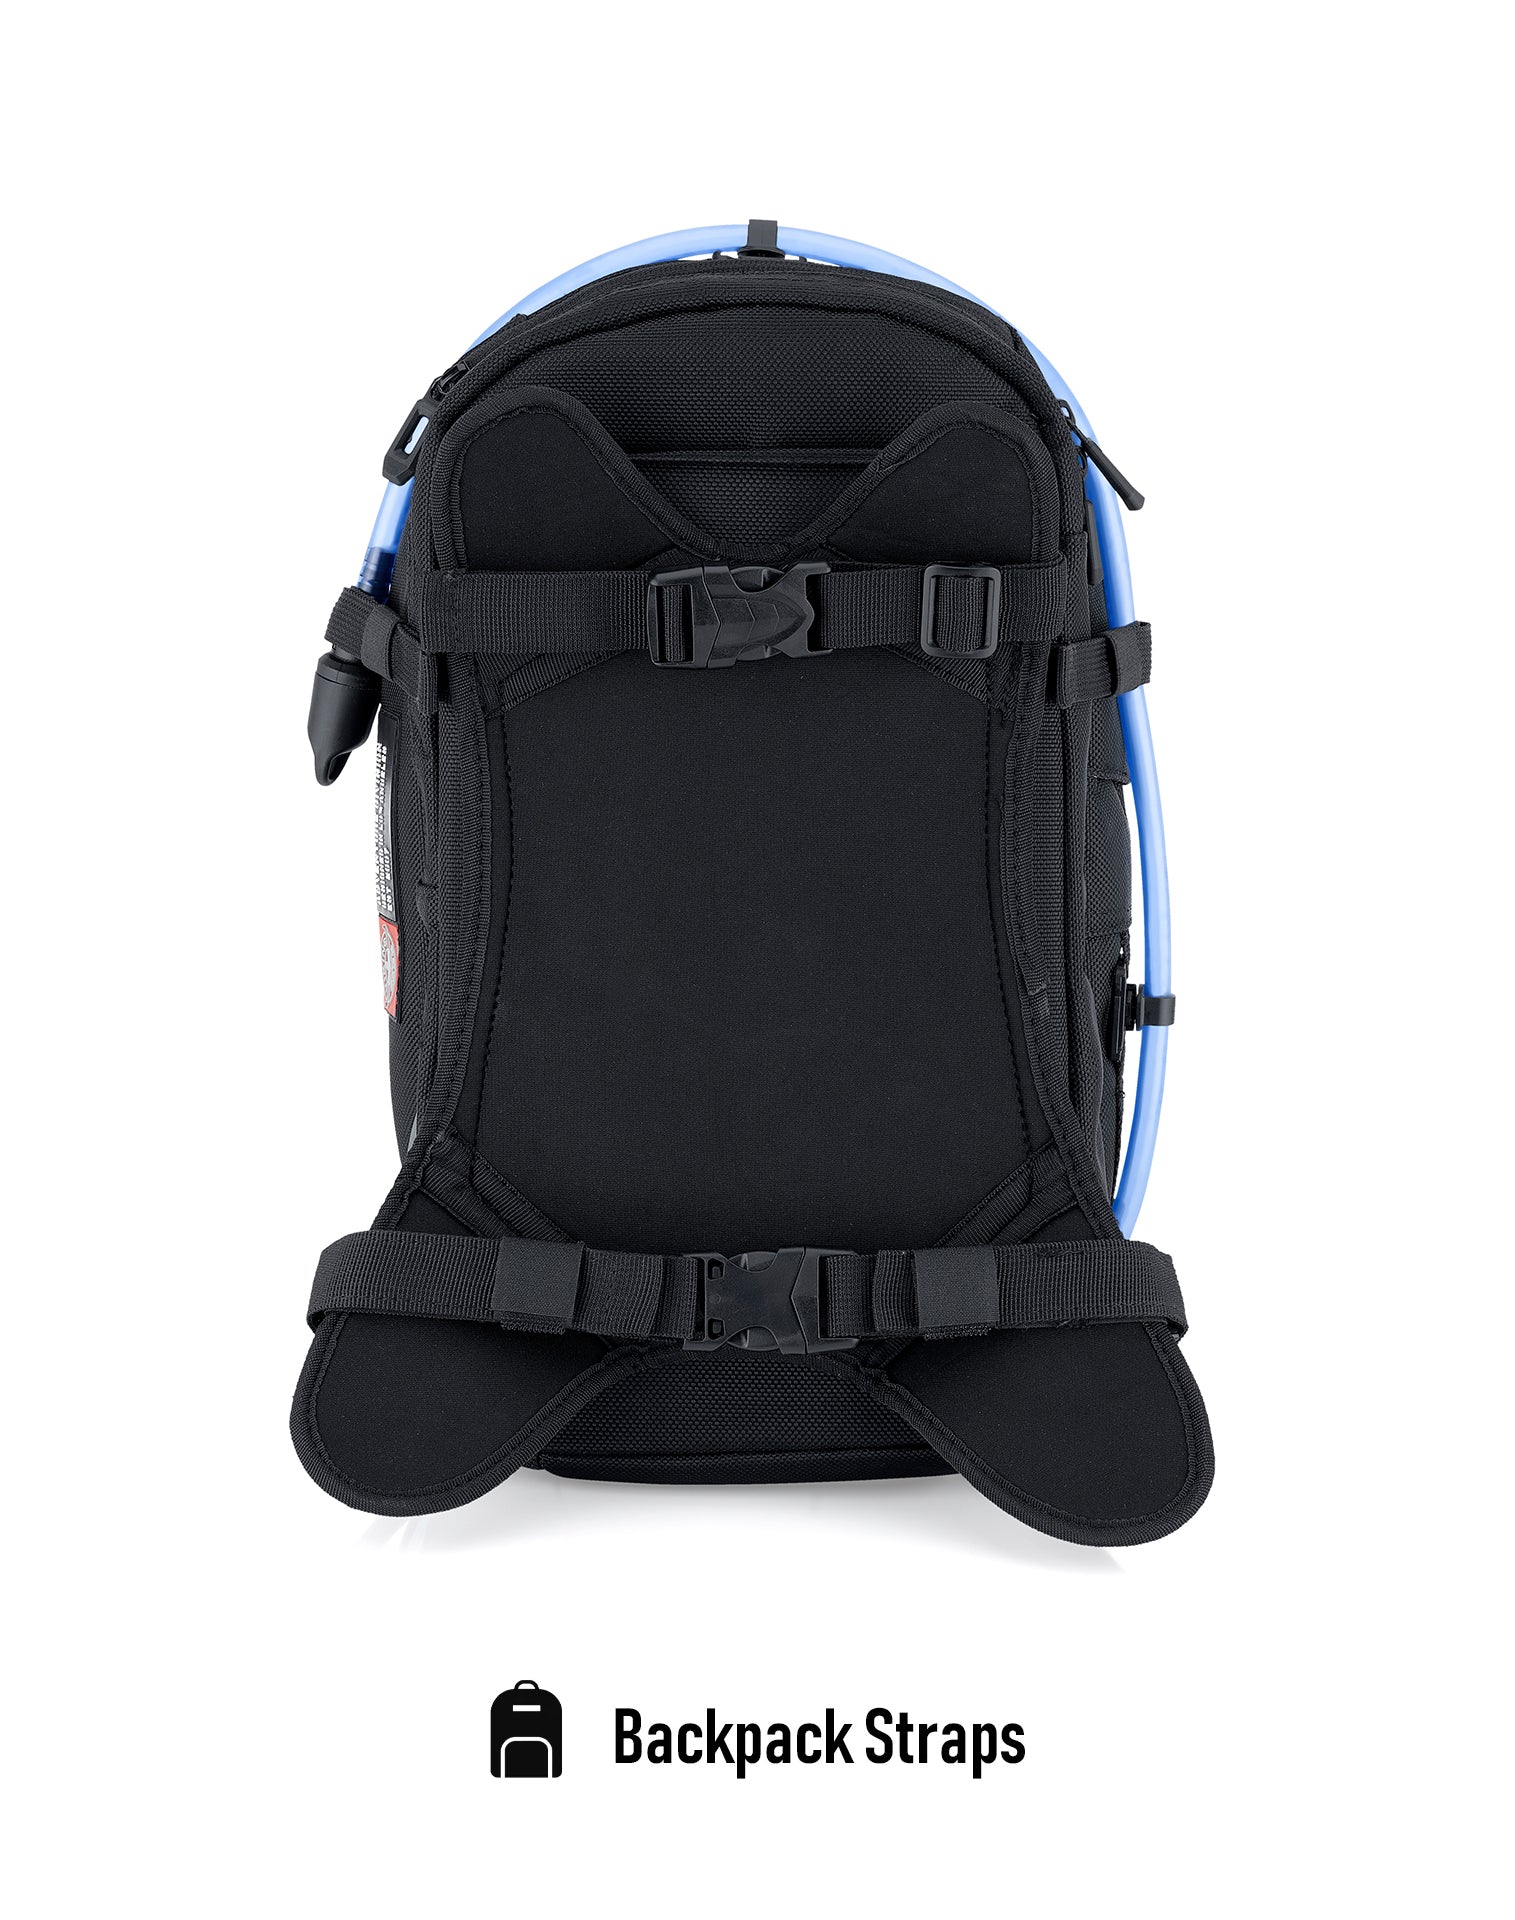 Viking Apex KTM ADV Touring Backpack with Hydration Pack